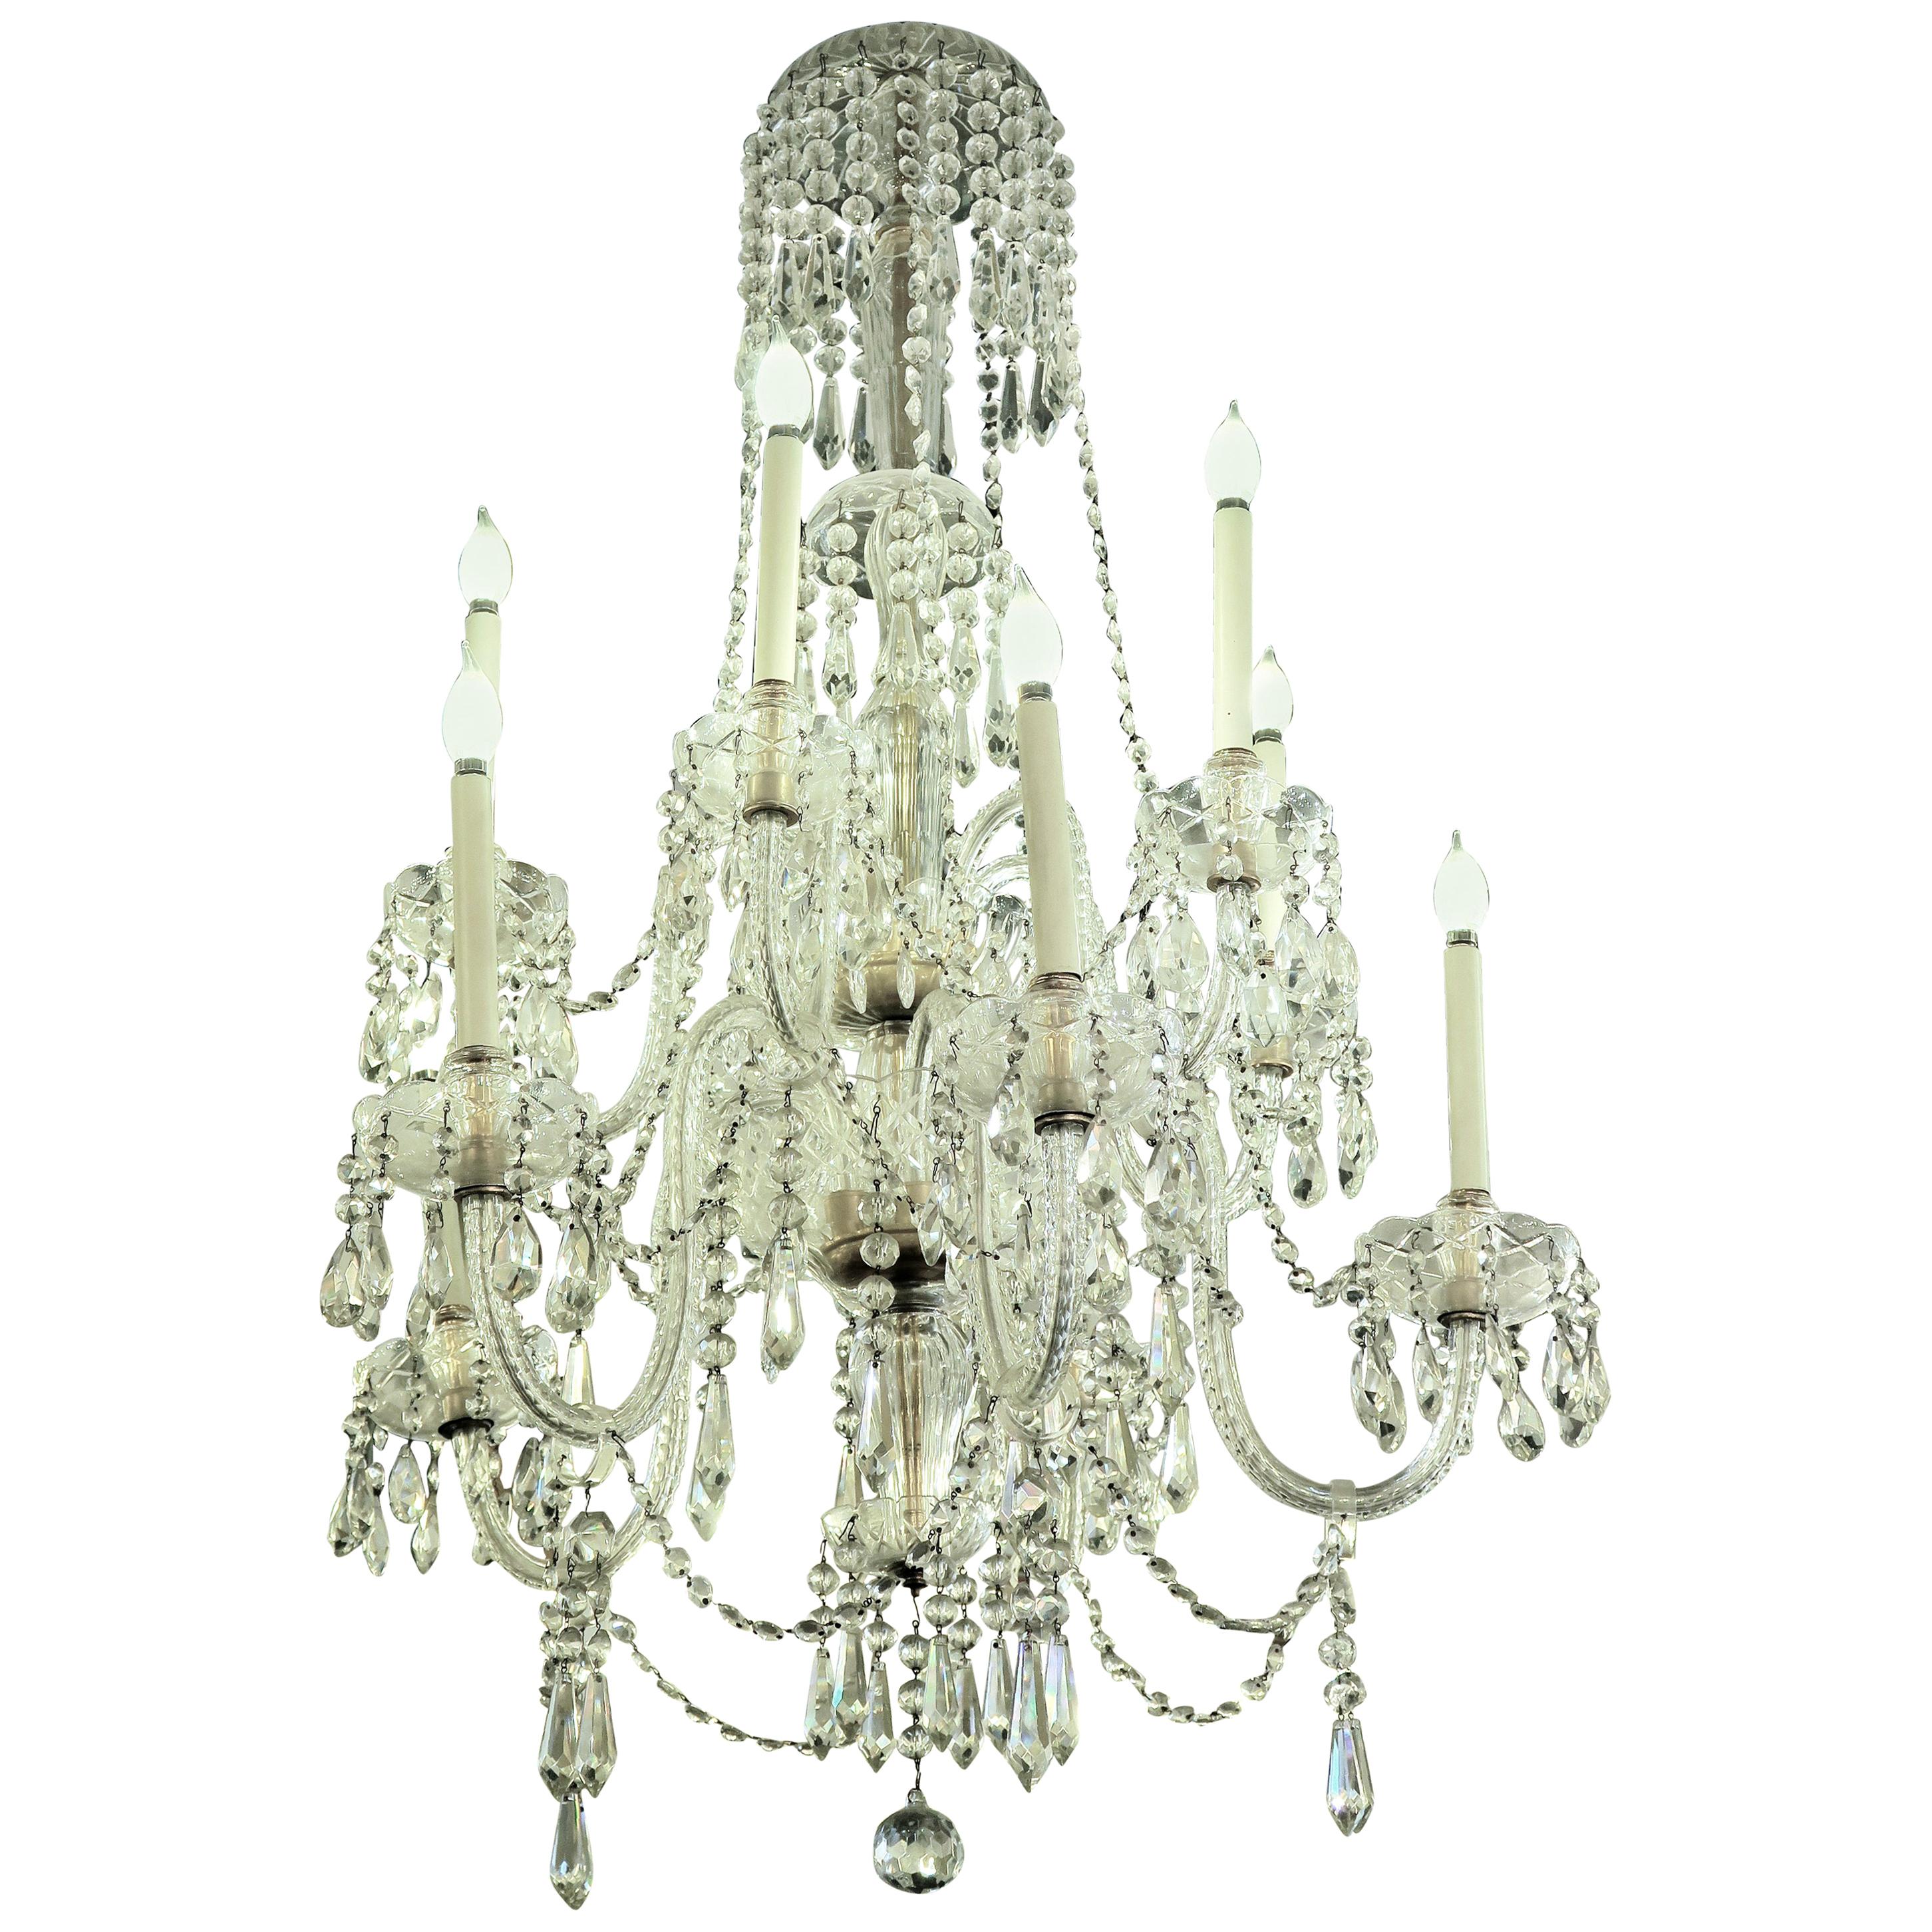 1940s Tall Eight Arm Crystal Chandelier with Brass Details